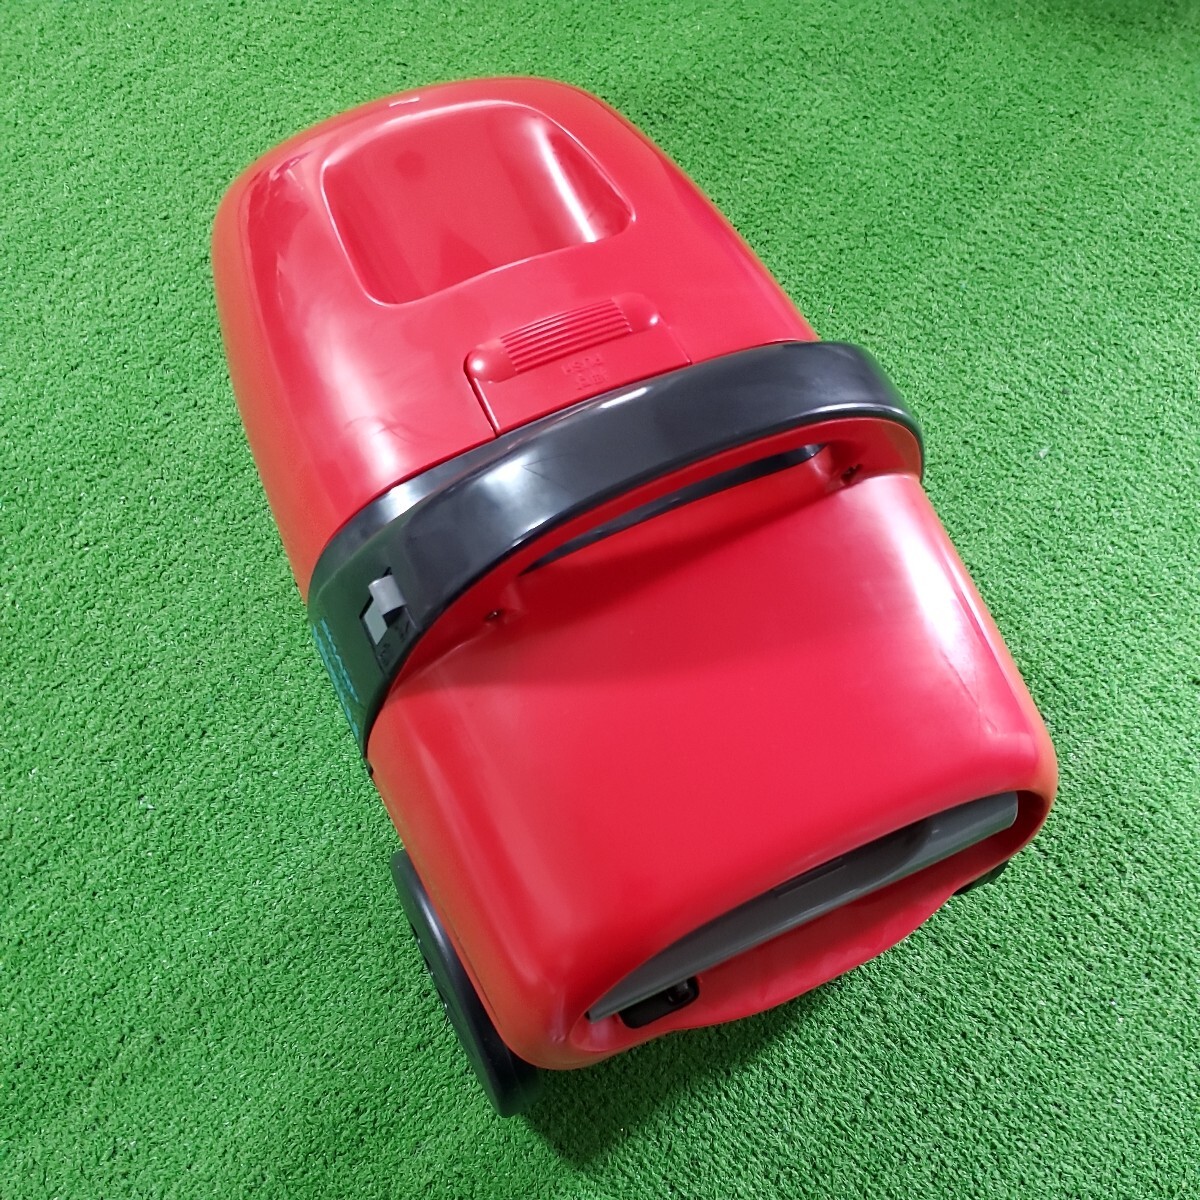 SHARP sharp vacuum cleaner EC-21F floor movement shape electric vacuum cleaner operation verification ending red Showa Retro rare goods that time thing box instructions equipped 